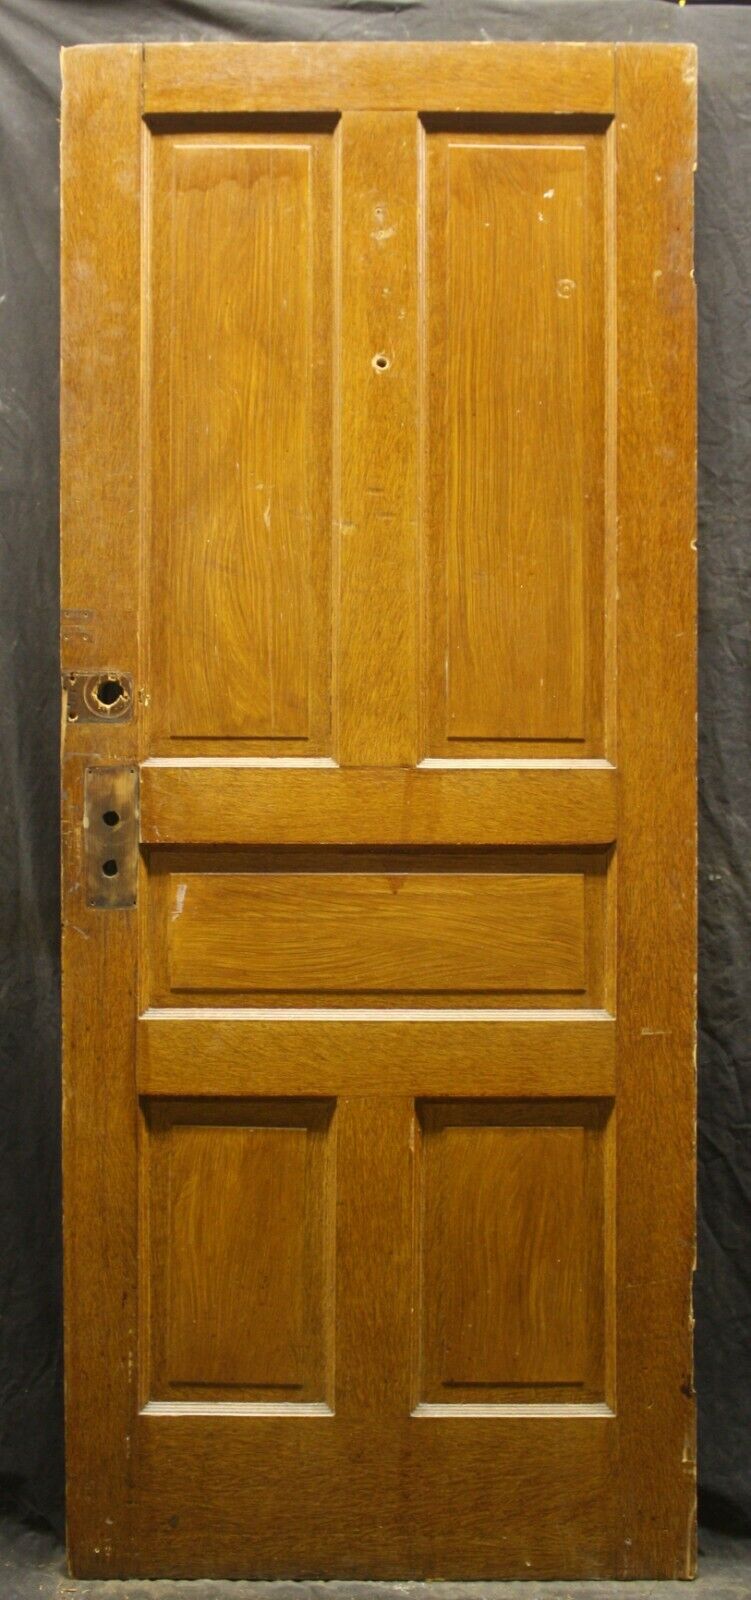 31.5"x79" Antique Vintage Old Reclaimed Salvaged SOLID Wood Wooden Interior Doors 5 Panels